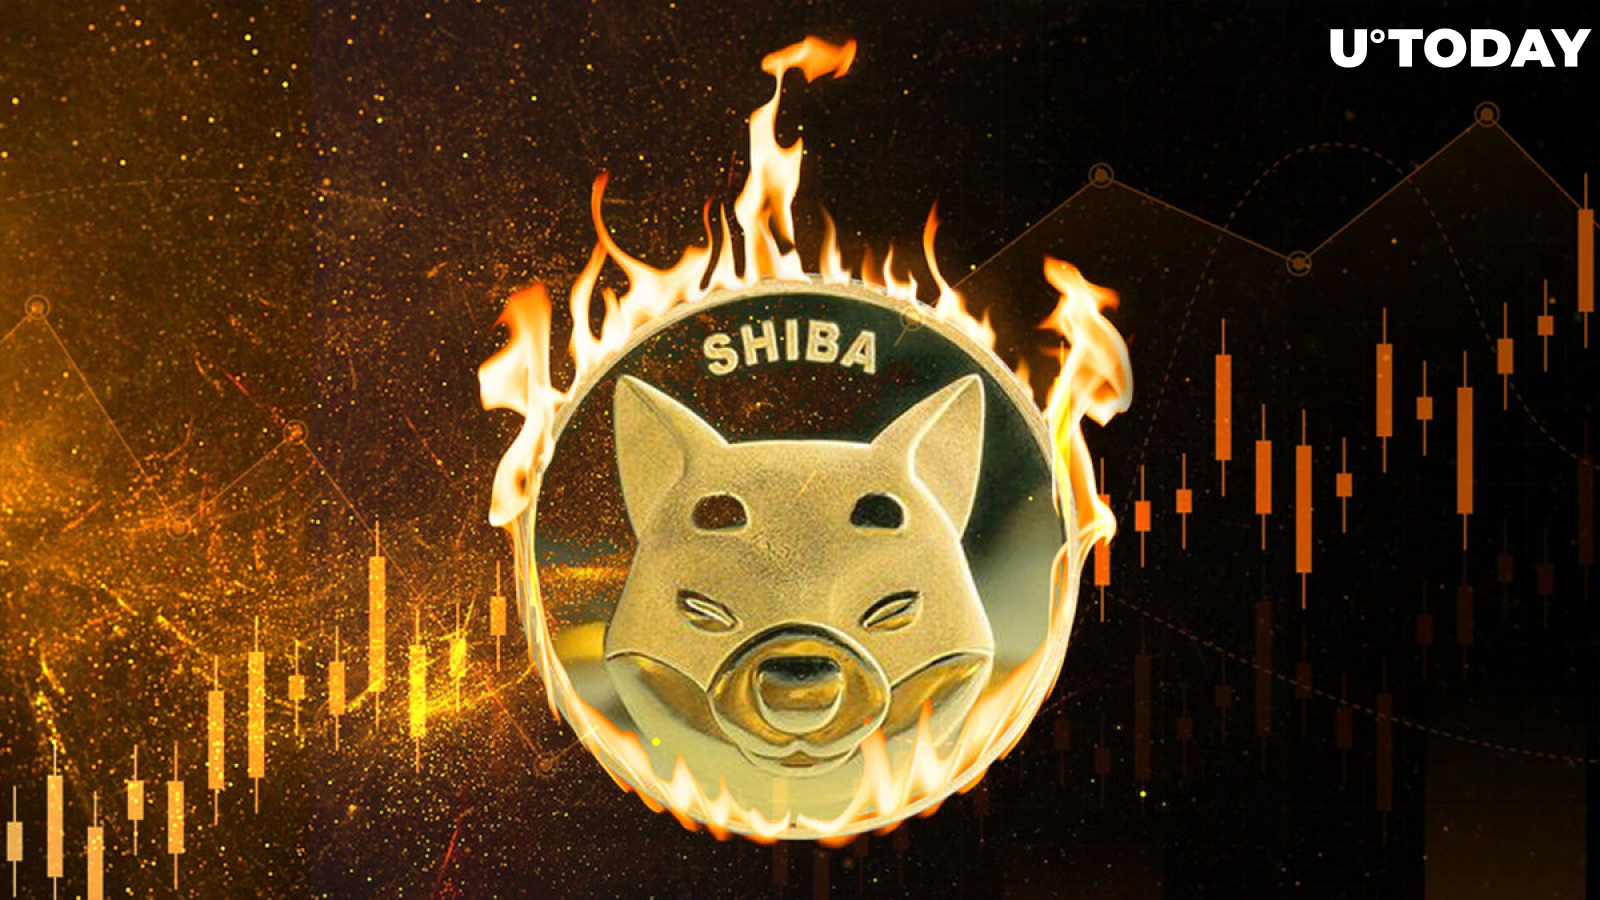 SHIB Burn Rate Spikes 13,198% as Hundreds of Millions of Shiba Inu Get Removed